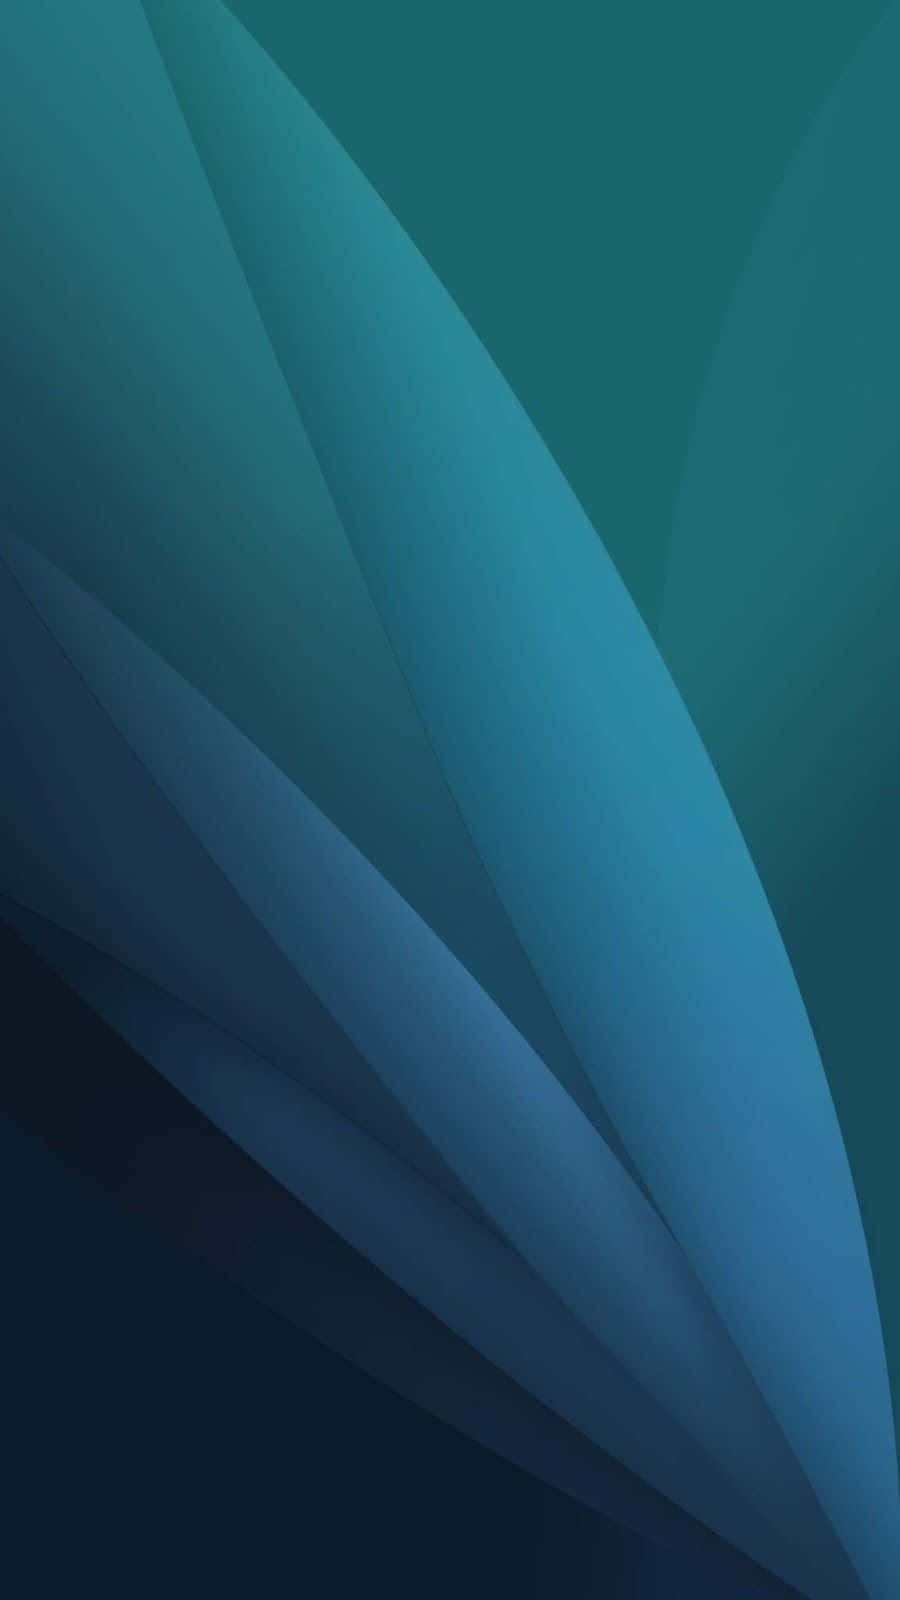 Abstract Blue Curves Background Wallpaper